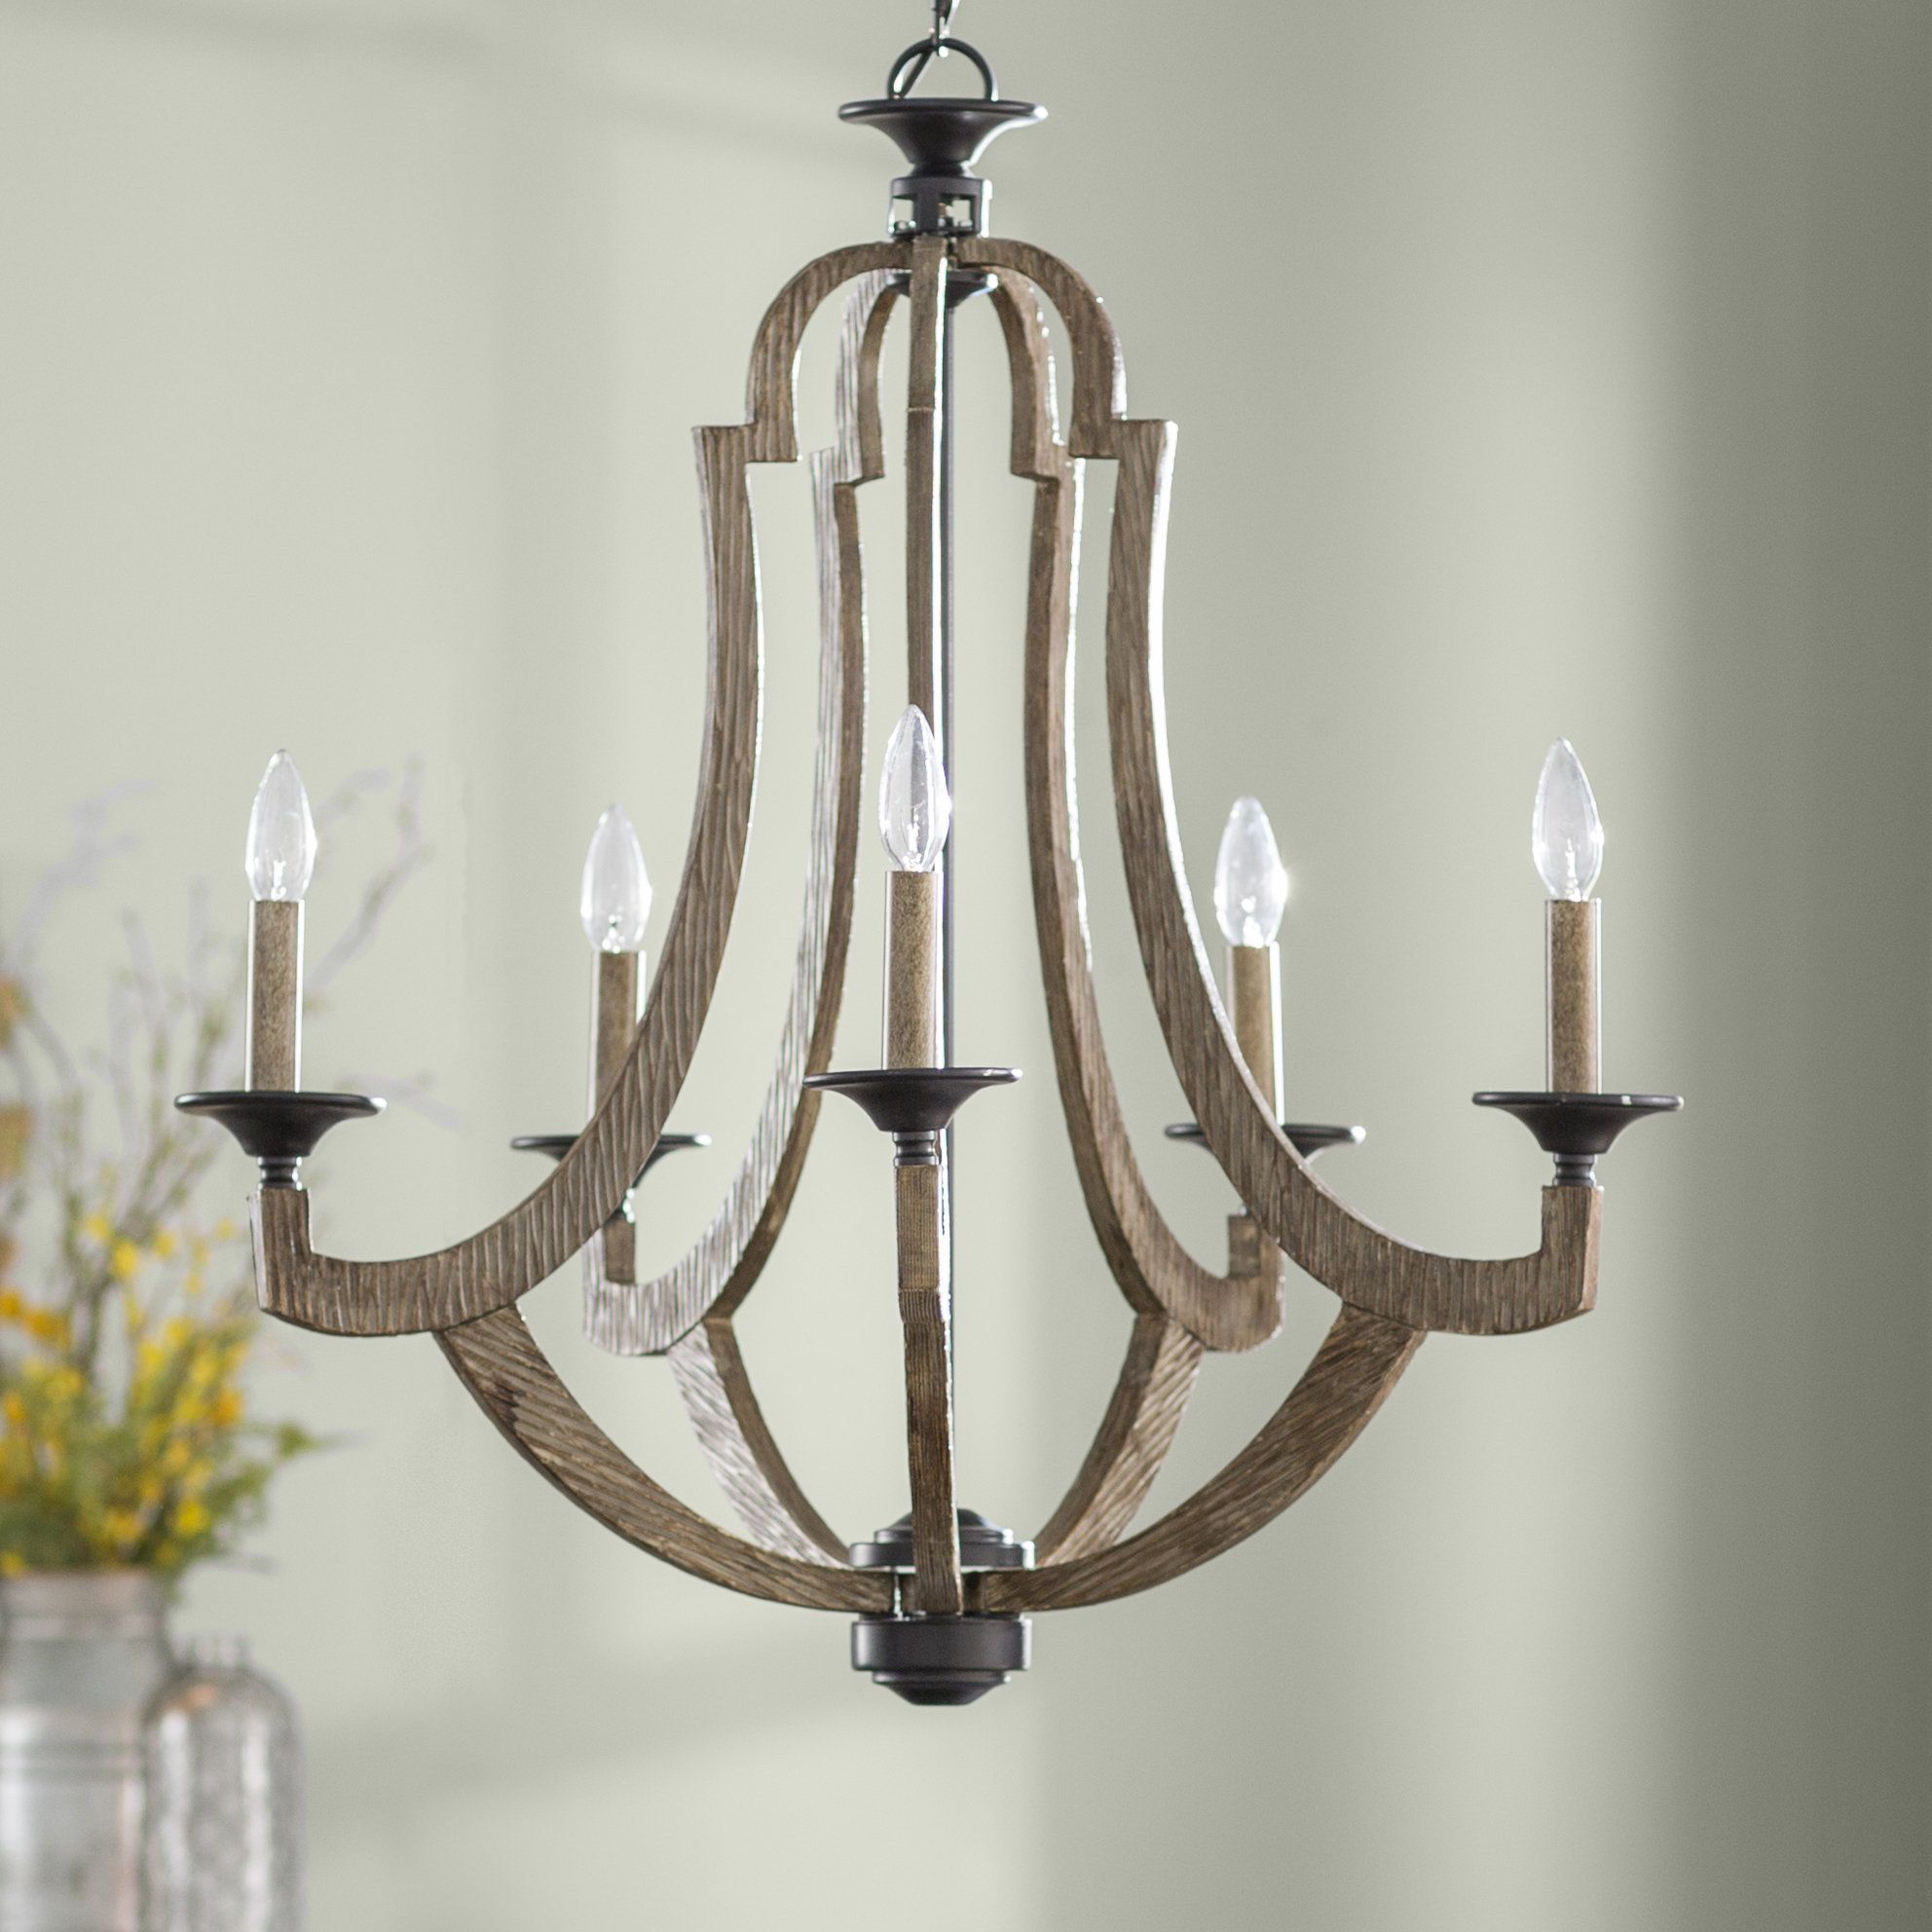 Most Recently Released Laurel Foundry Modern Farmhouse Marcoux 5 Light Empire Chandelier Regarding Phifer 6 Light Empire Chandeliers (View 25 of 25)